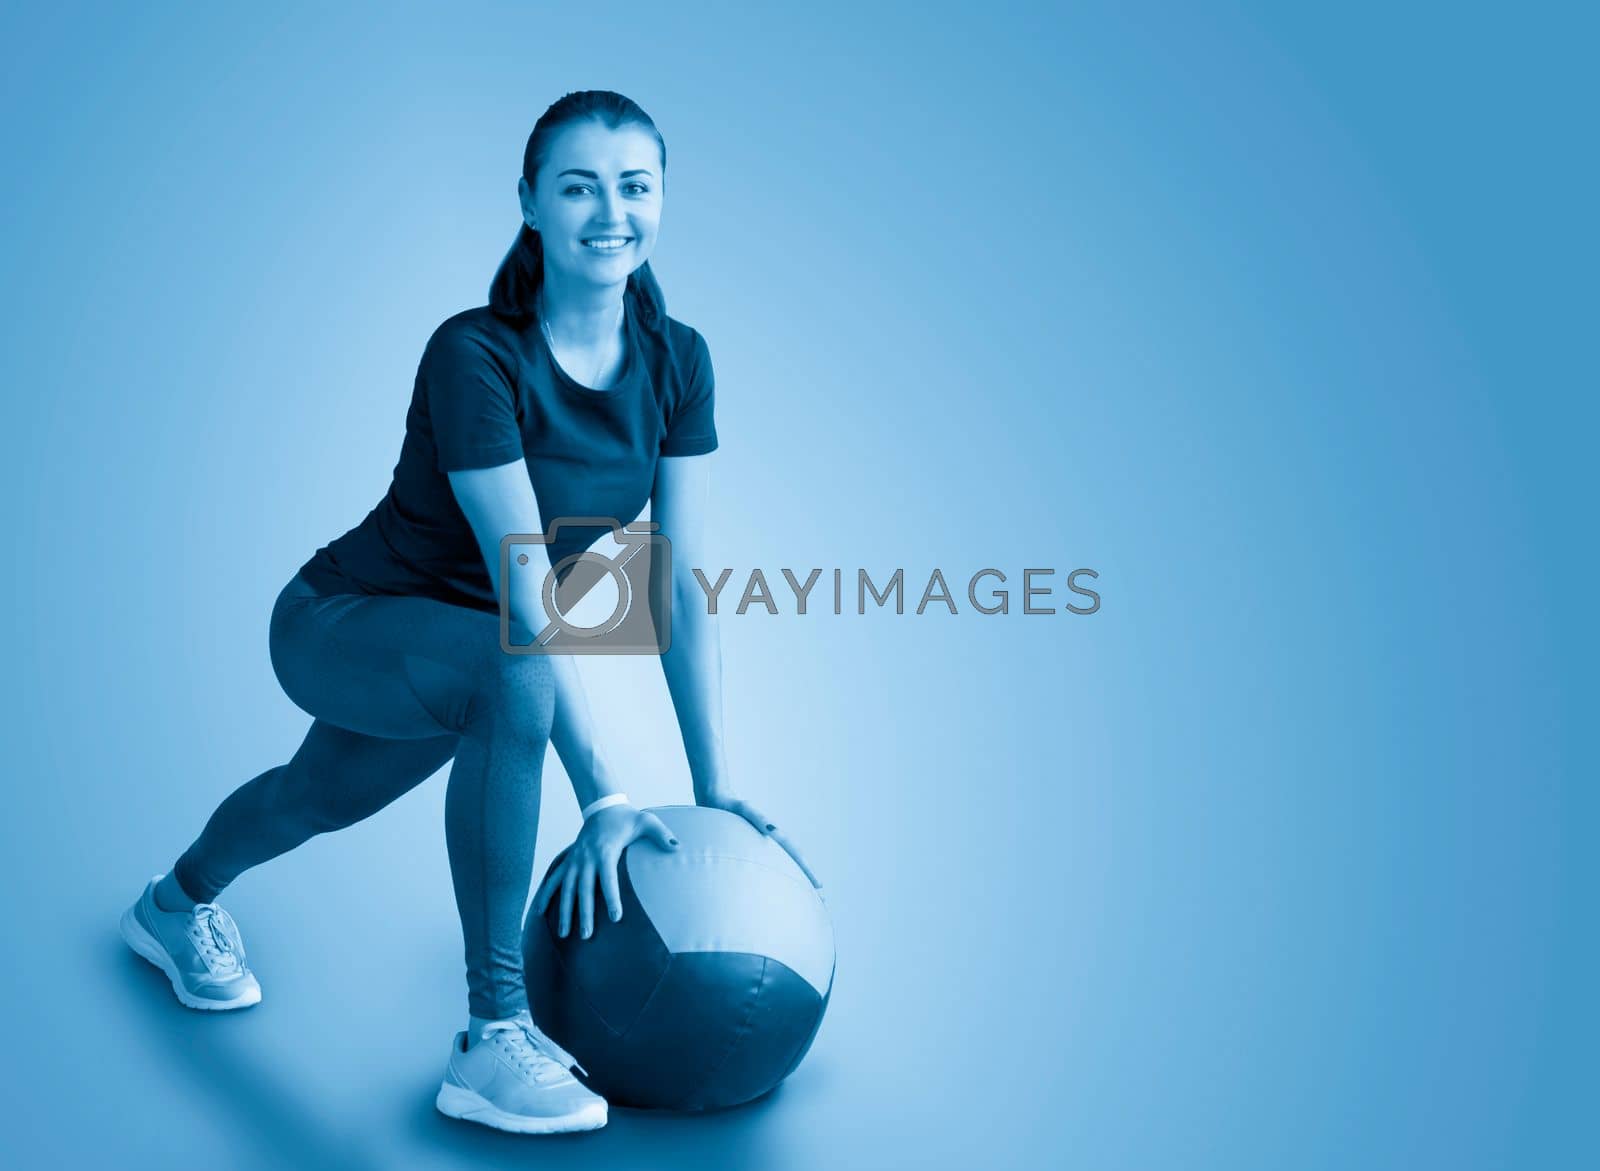 Royalty free image of woman in gym relaxing with medicine ball by Mariakray